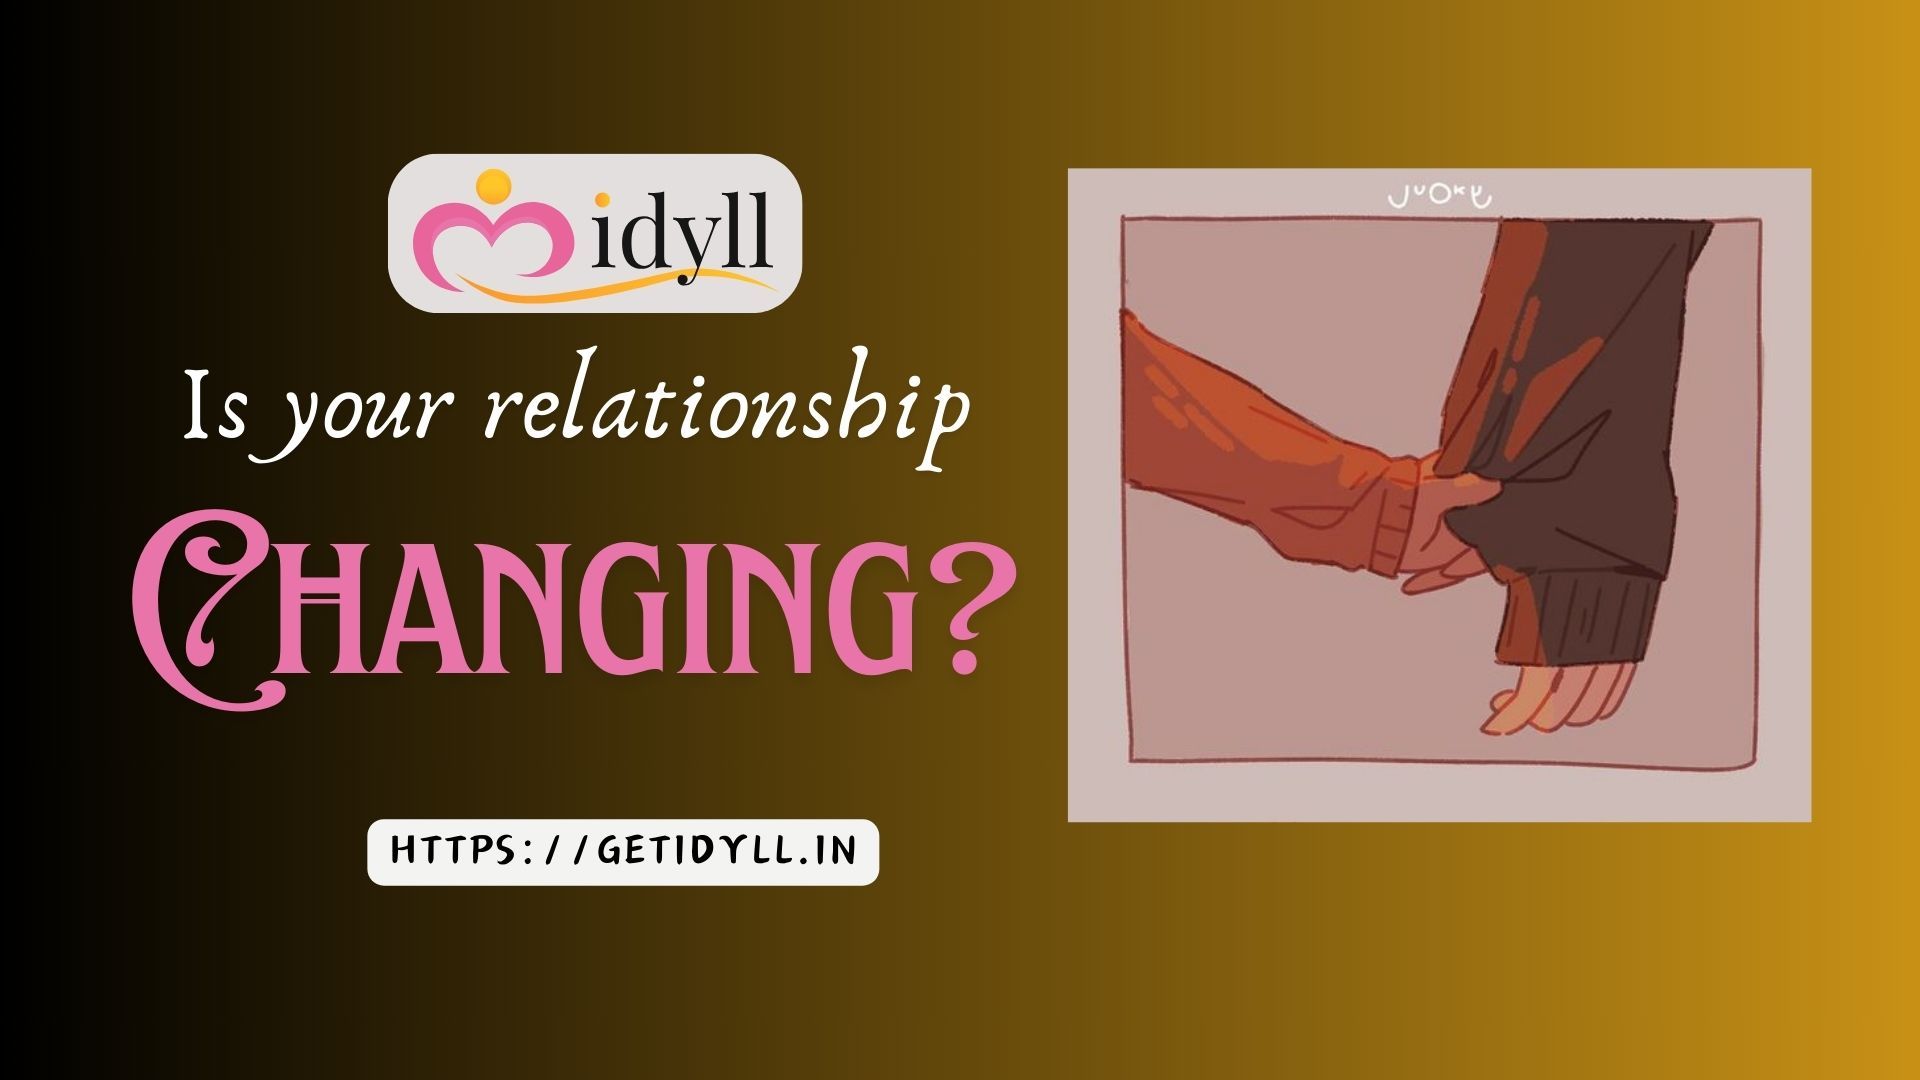 idyll, idyll dating, changing relationship, love, romance, relationship, dating tips, love advice